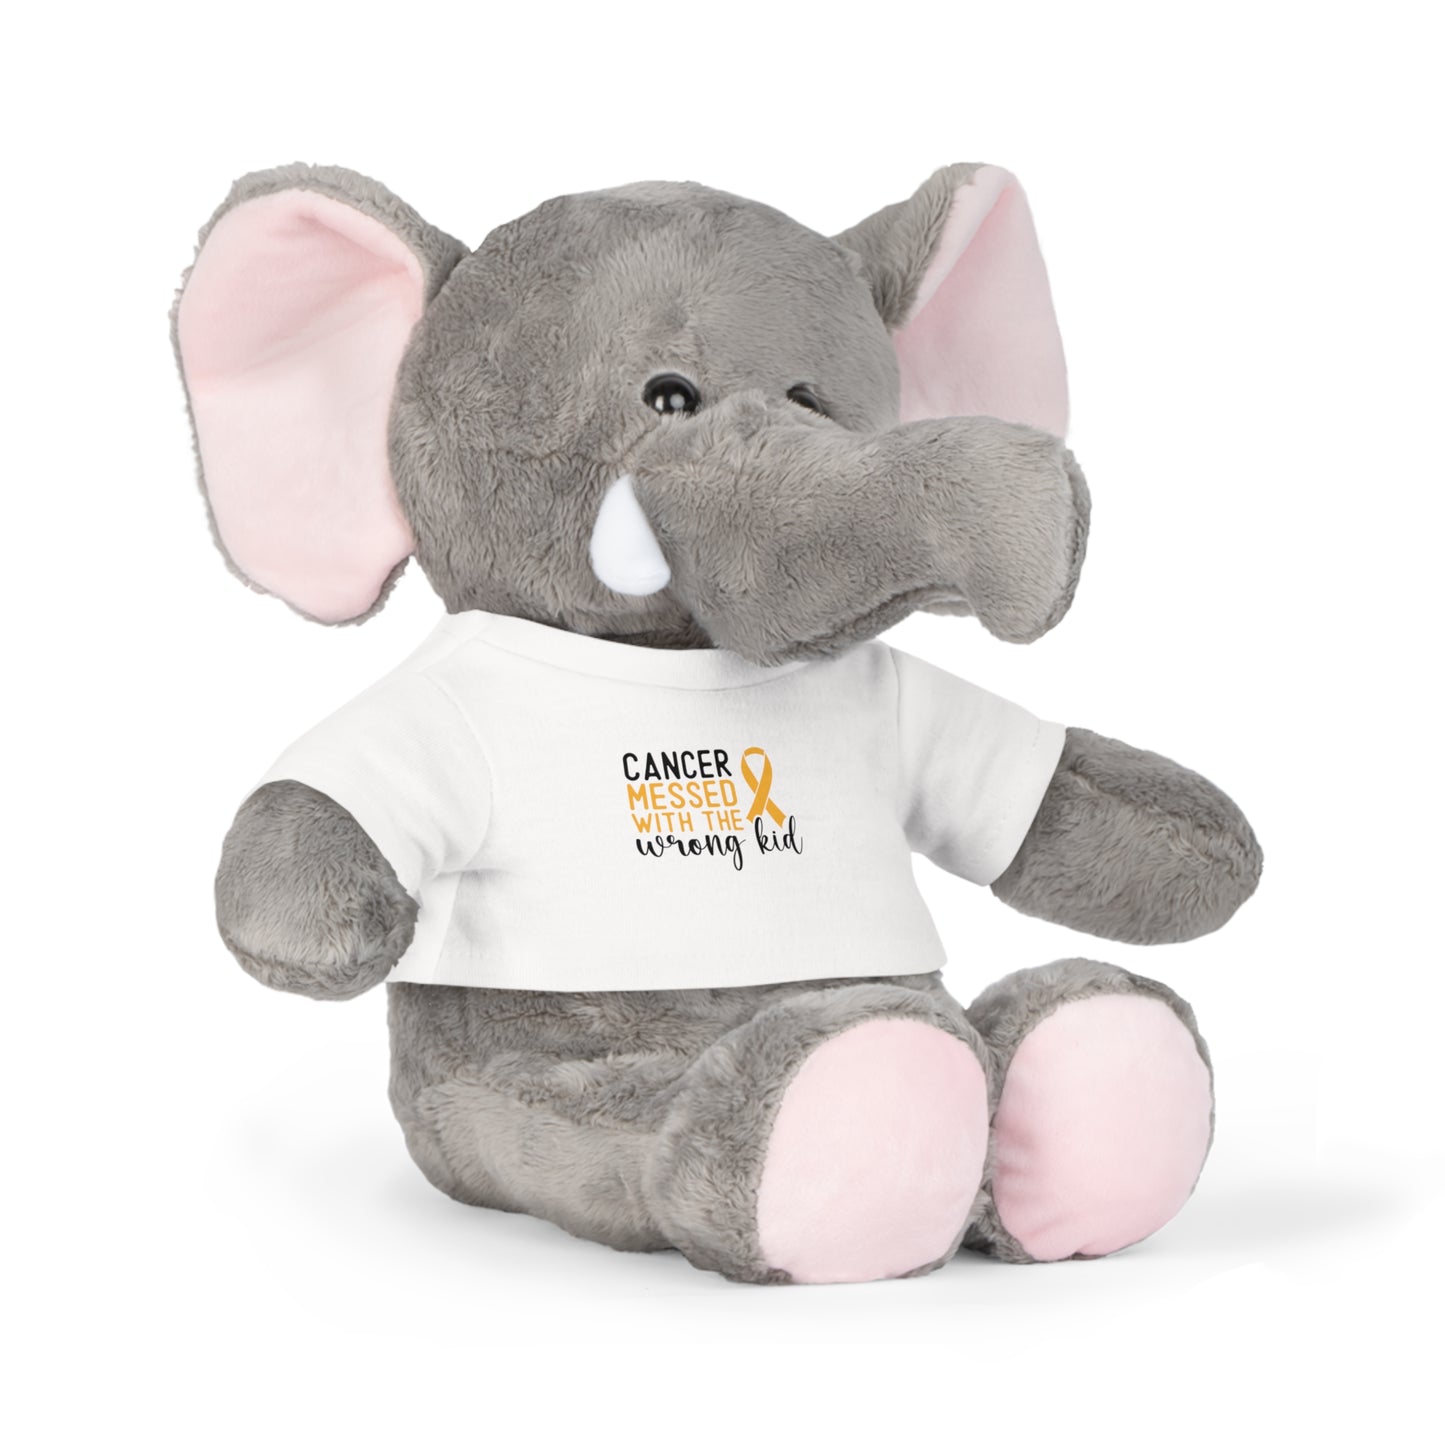 Childhood Cancer awareness - Plush Toy with T-Shirt